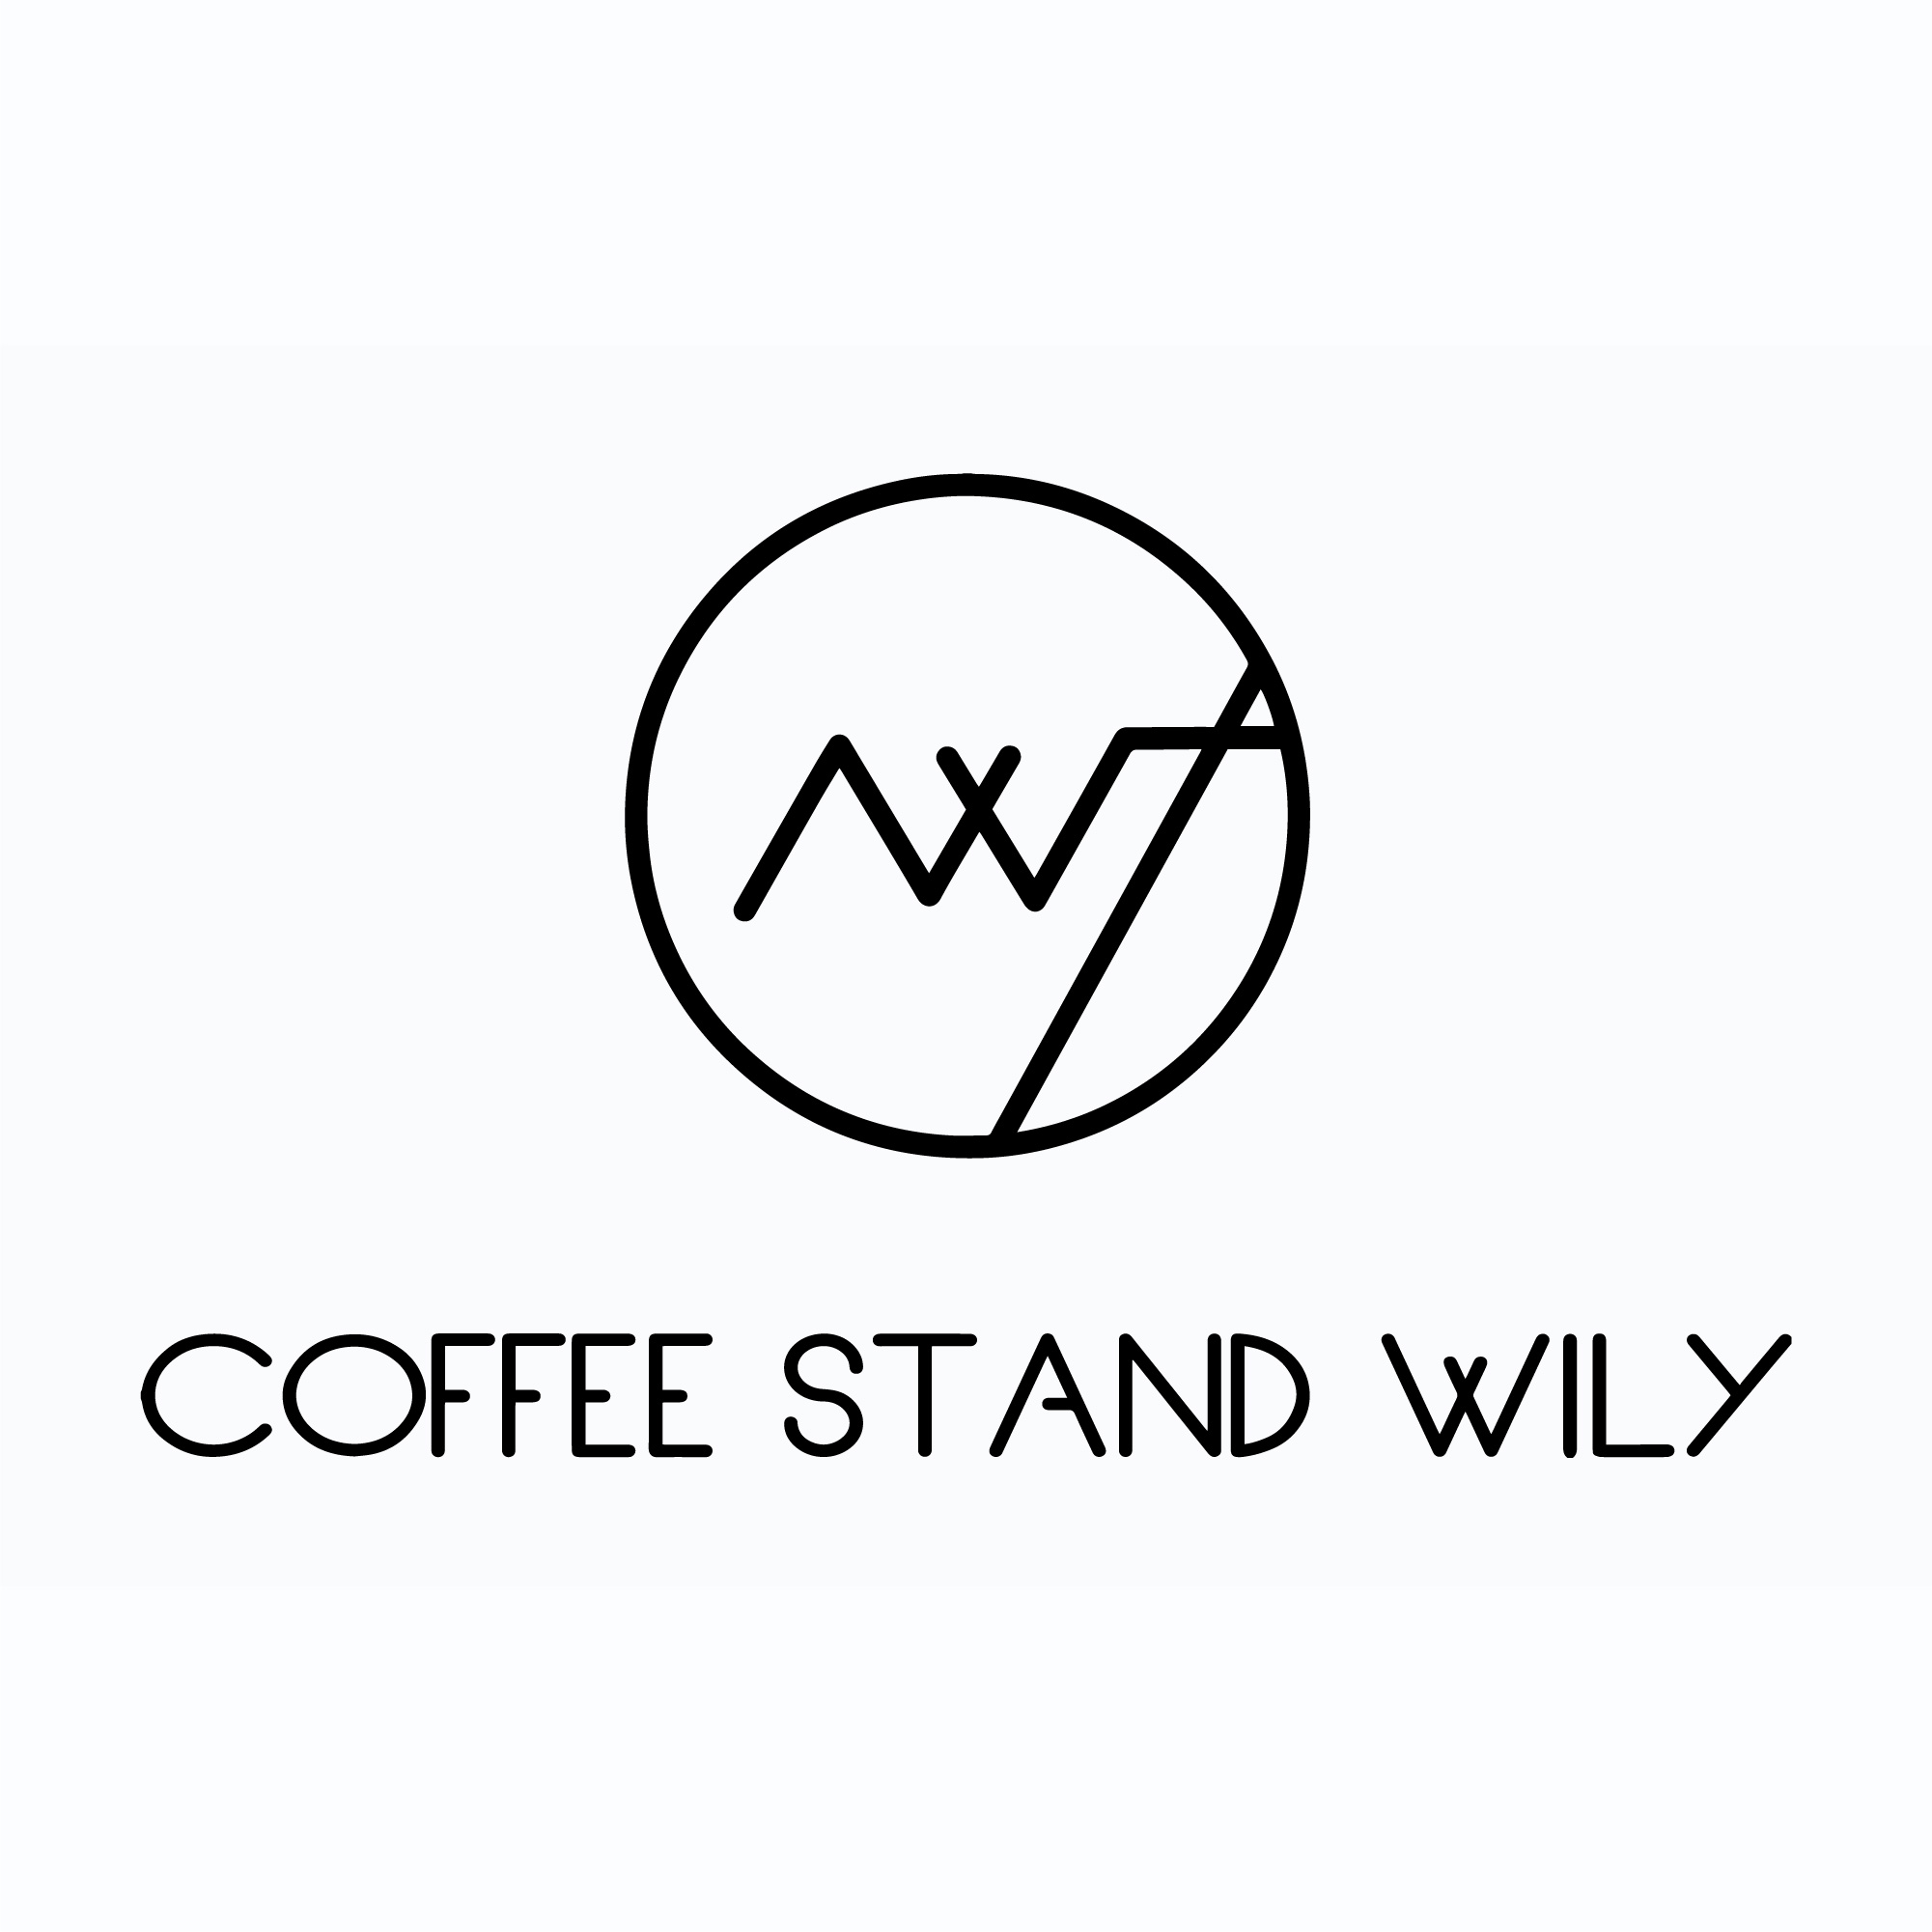 COFFEE STAND Wily